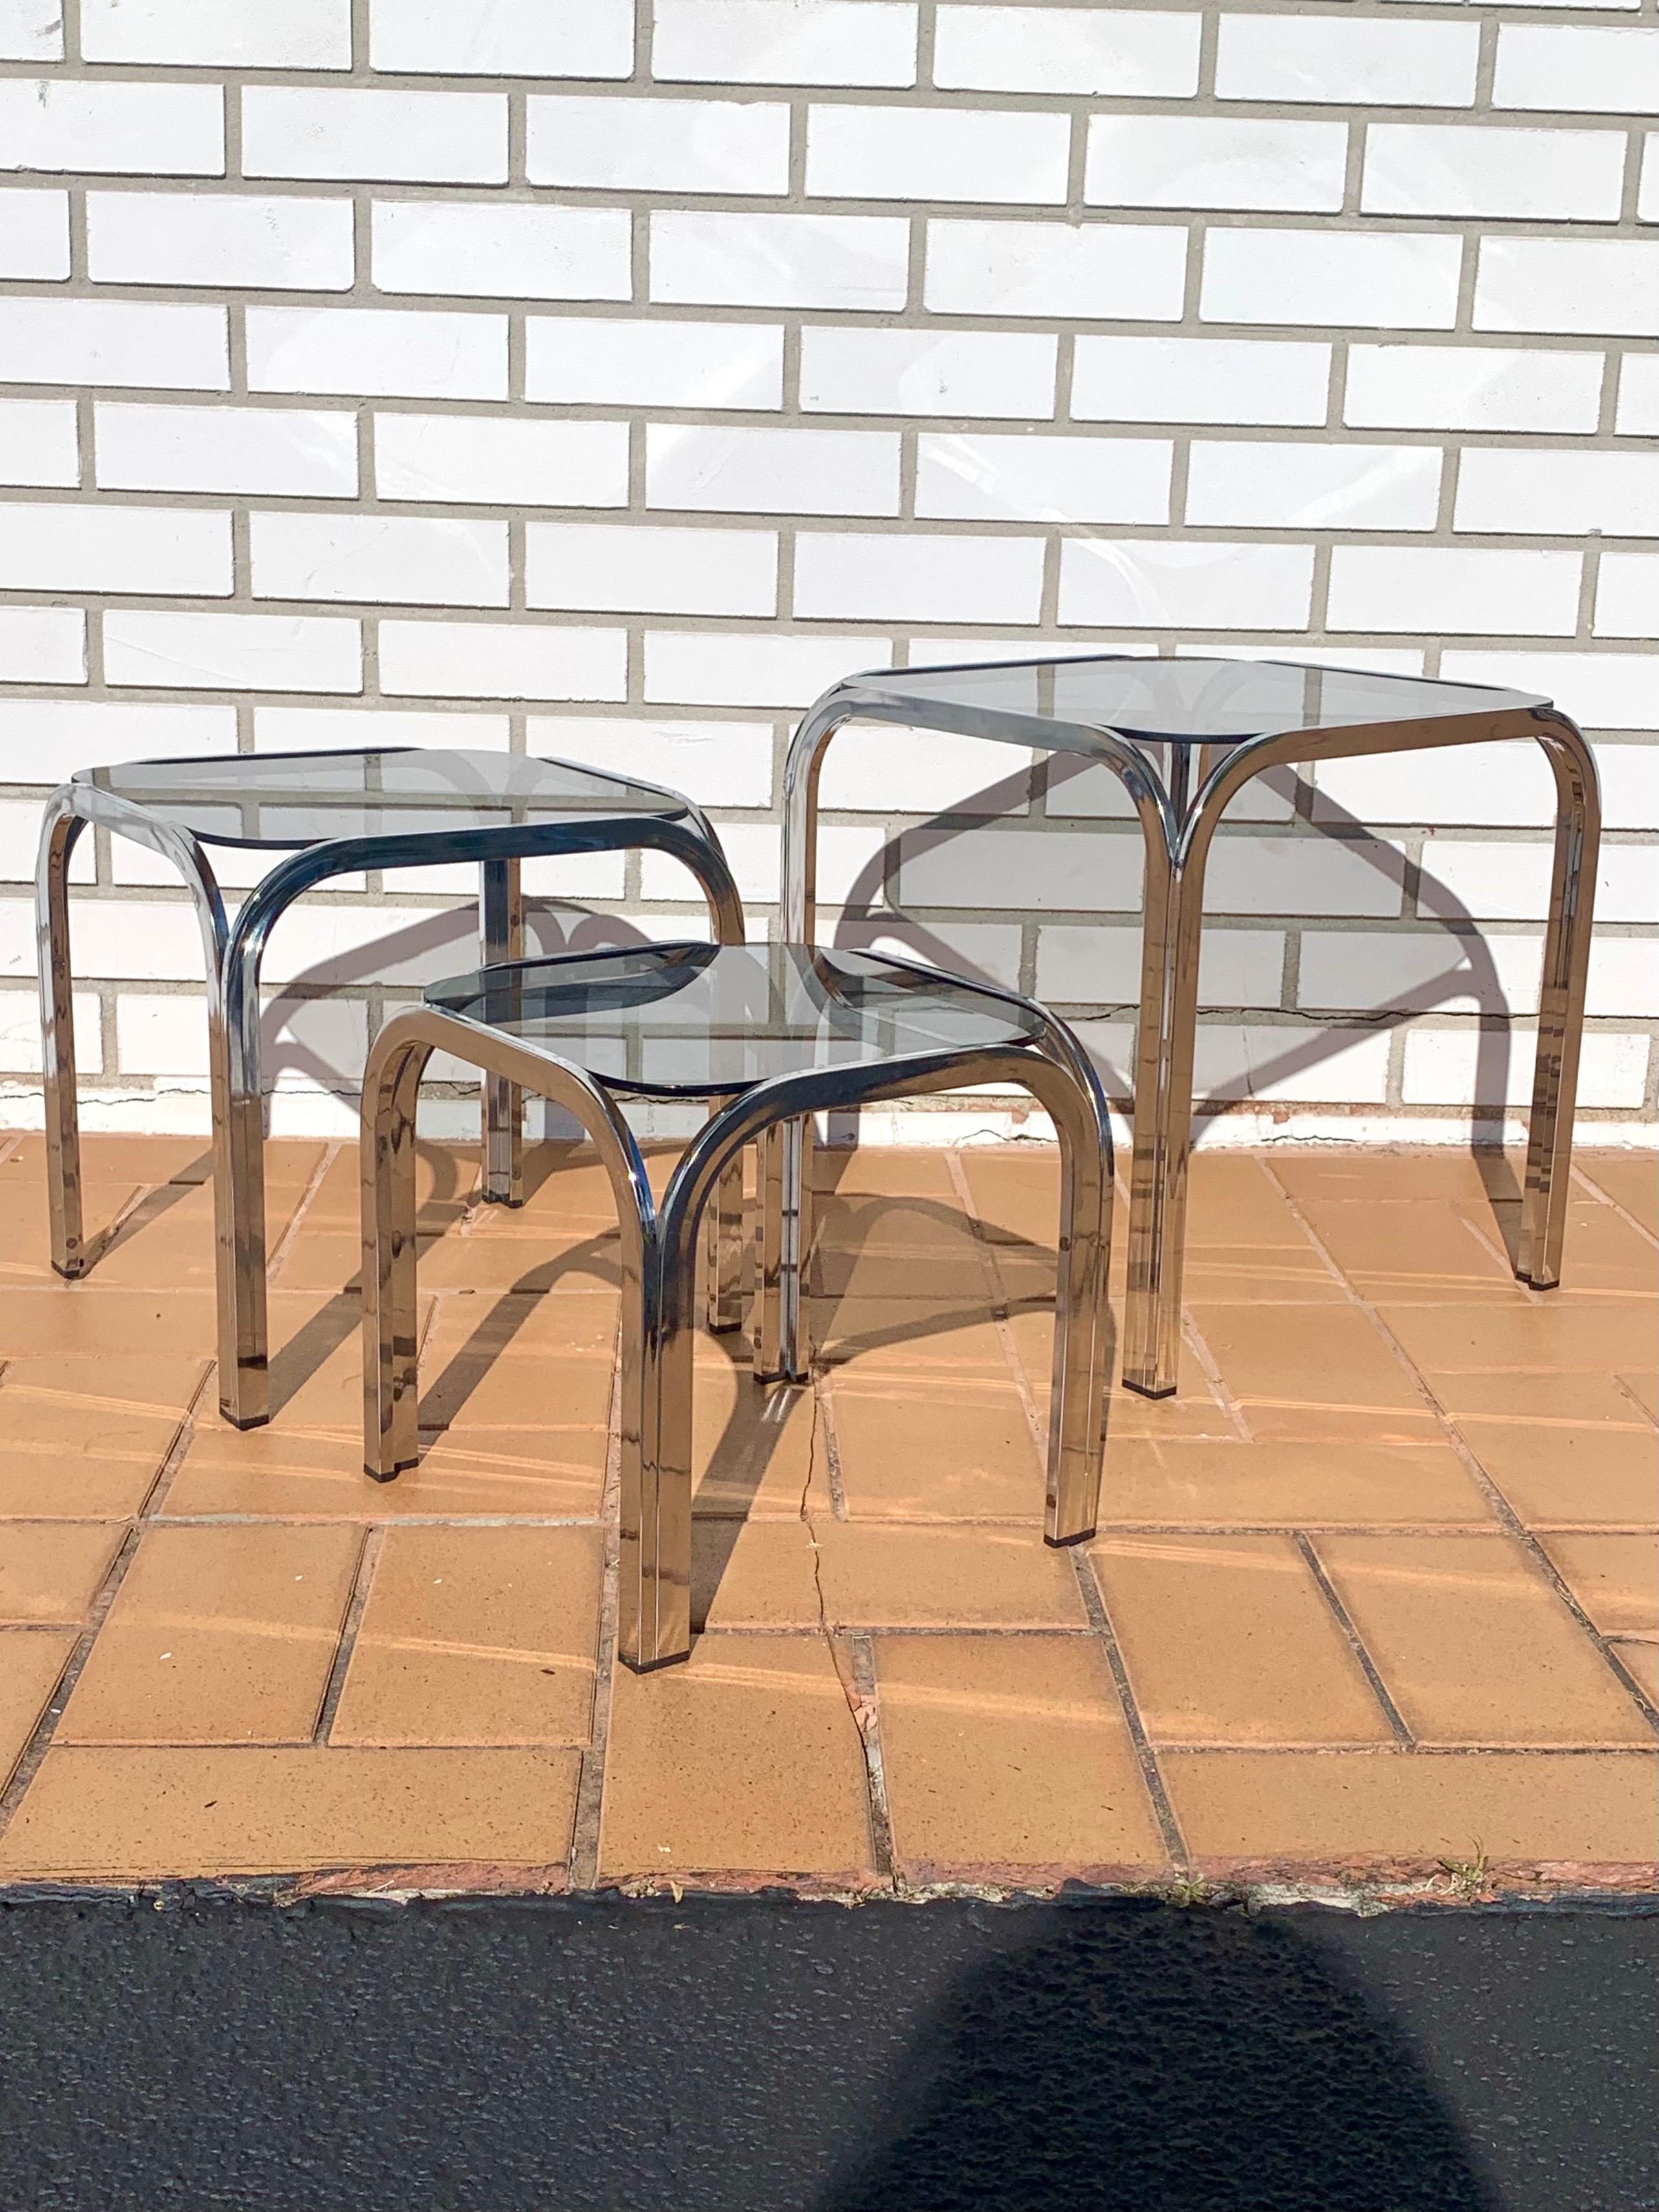 Set of 3 chrome nesting tables. With smoked glass. Simple yet elegant archway design. Each smaller table fits under the next bigger table. Tables are in great condition with no damage to the chrome and only some light scratching on the glass.